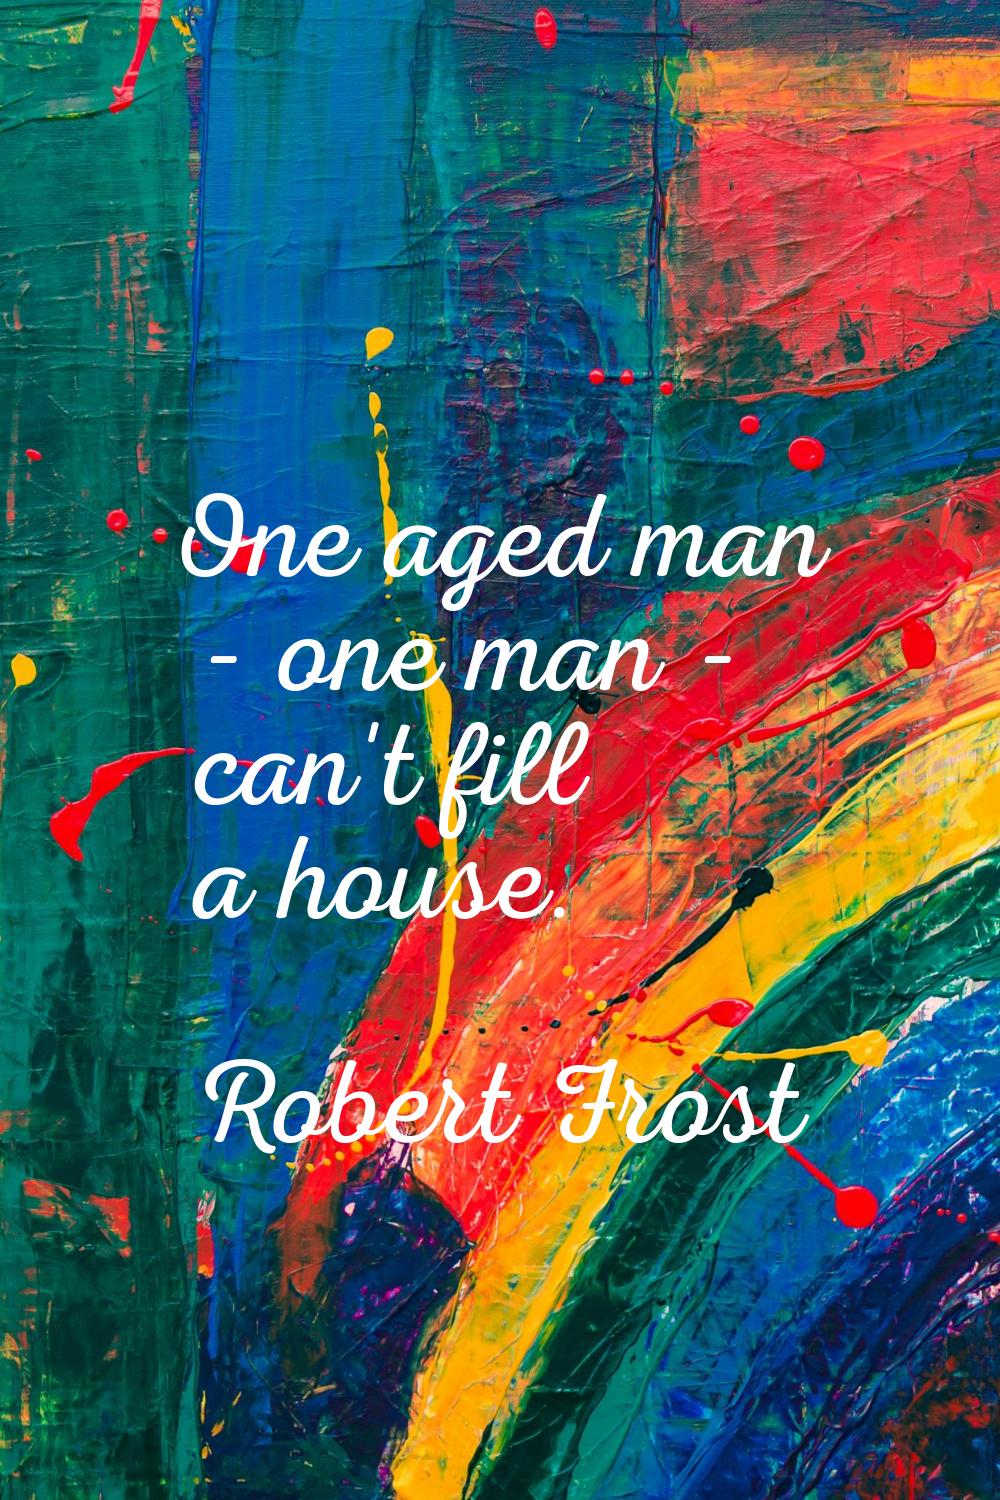 One aged man - one man - can't fill a house.